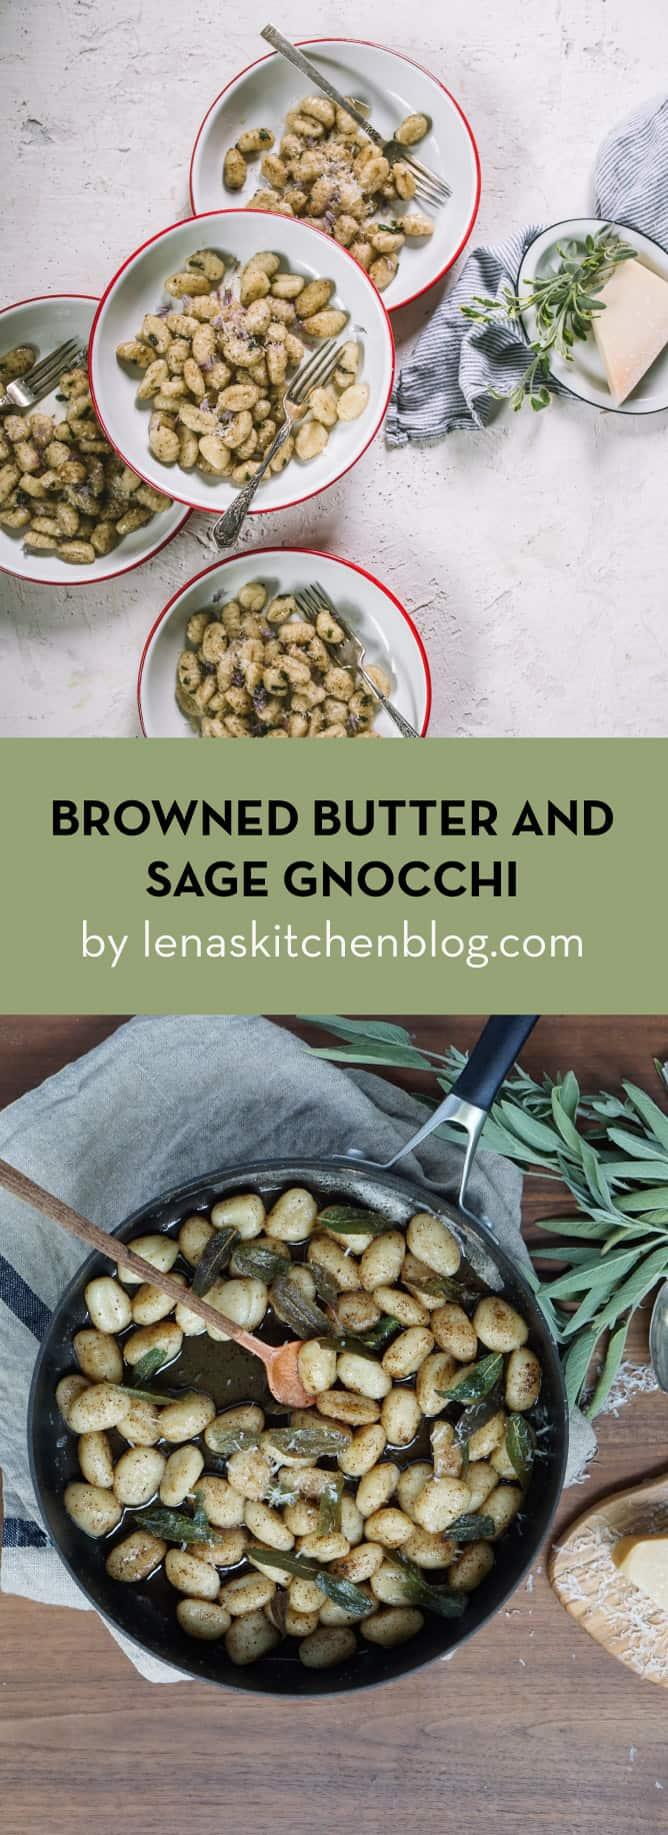 easy browned butter and sage gnocchi by lenaskitchenblog.com